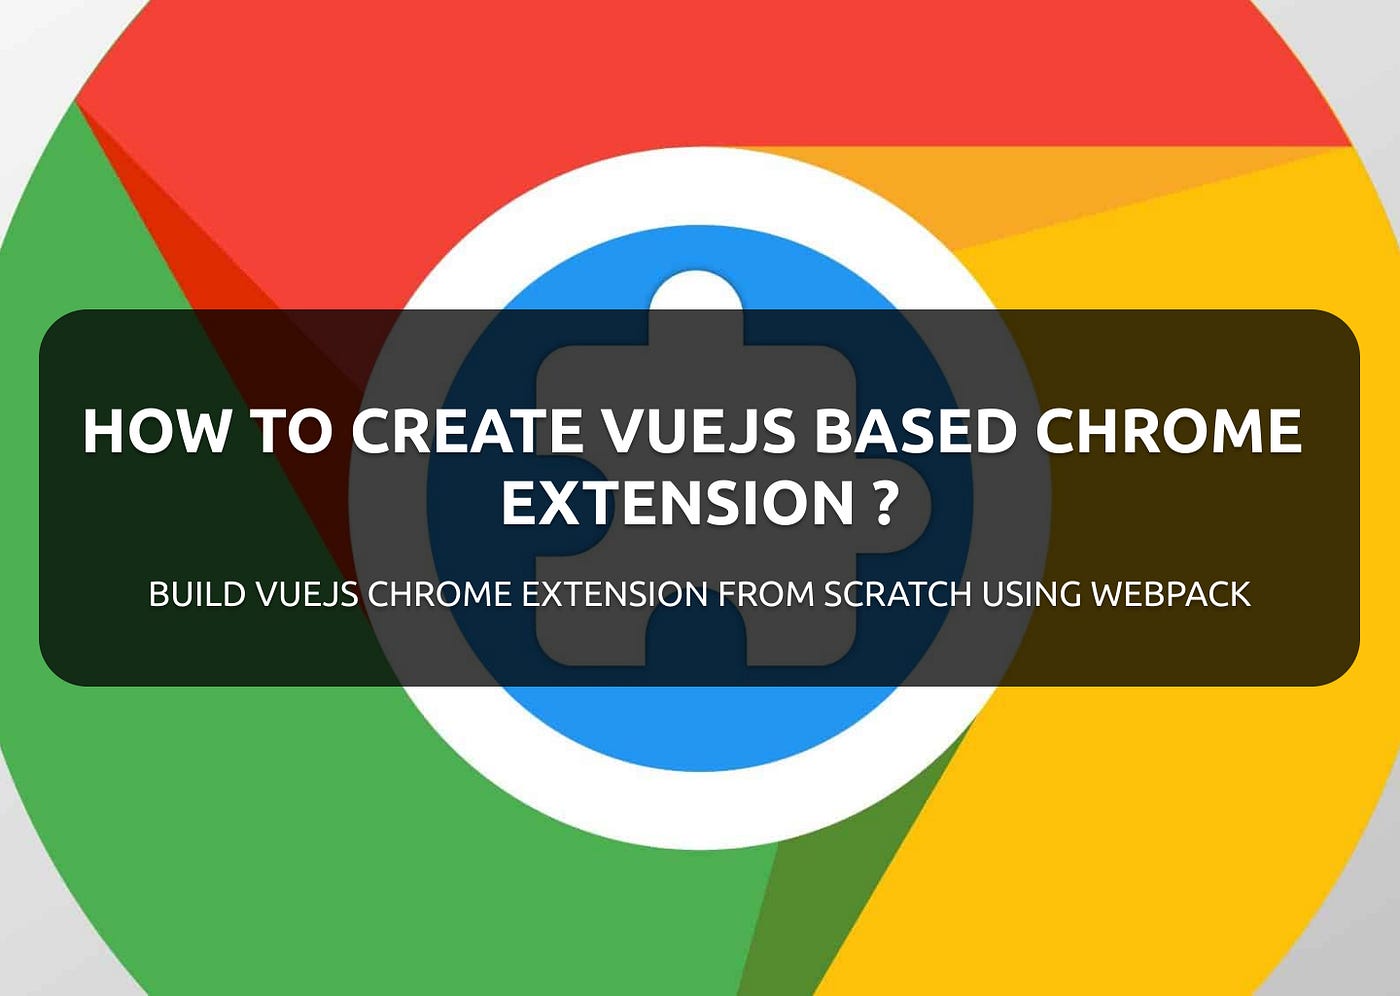 How to Create a Vue-based Chrome Extension, by SIHEM BOUHENNICHE